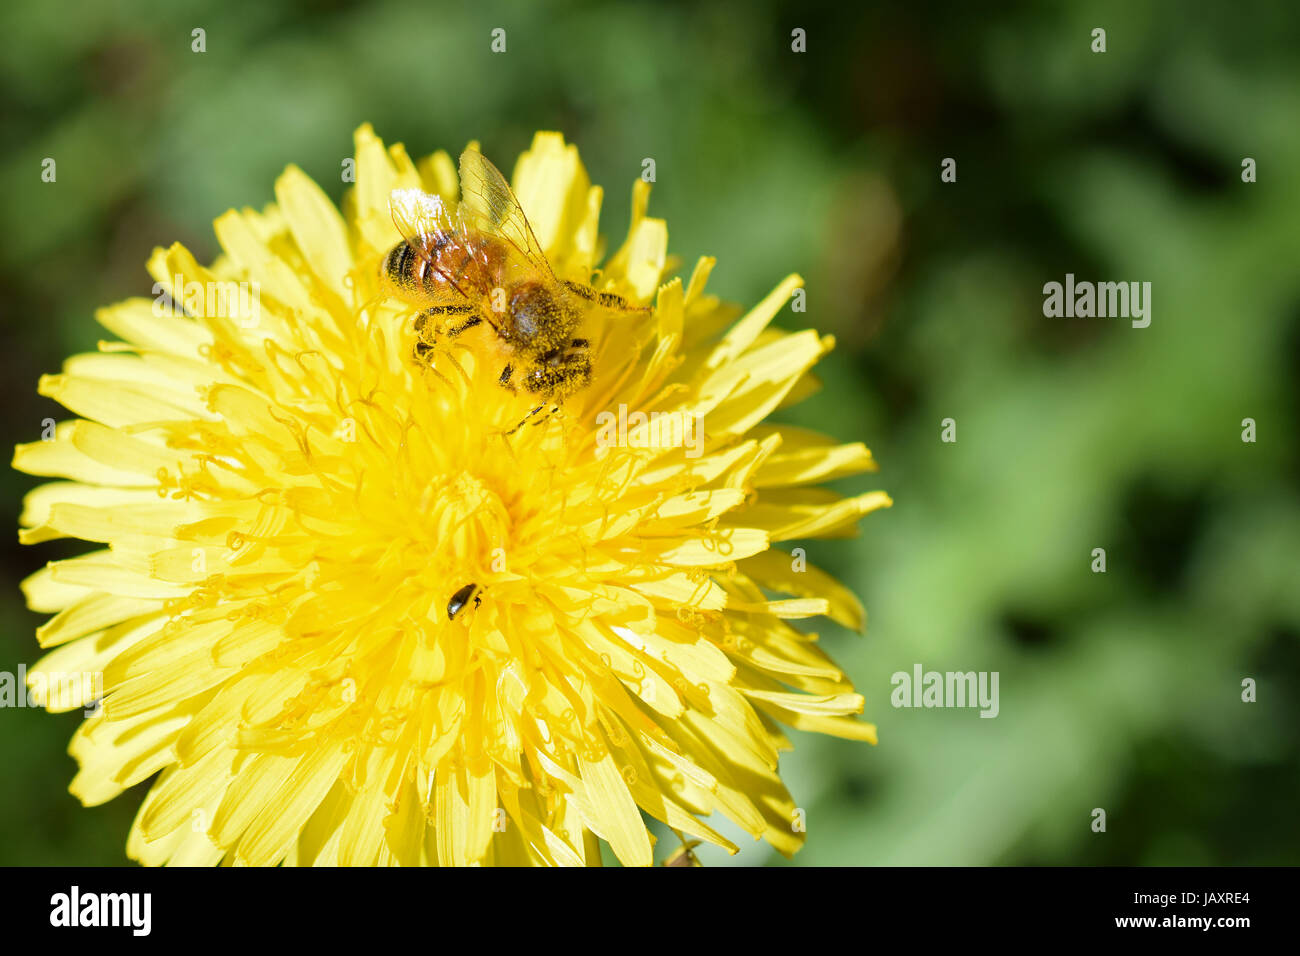 Honey bee (Apis mellifera) on Dandelion flower. Its body has covered with pollen. Stock Photo